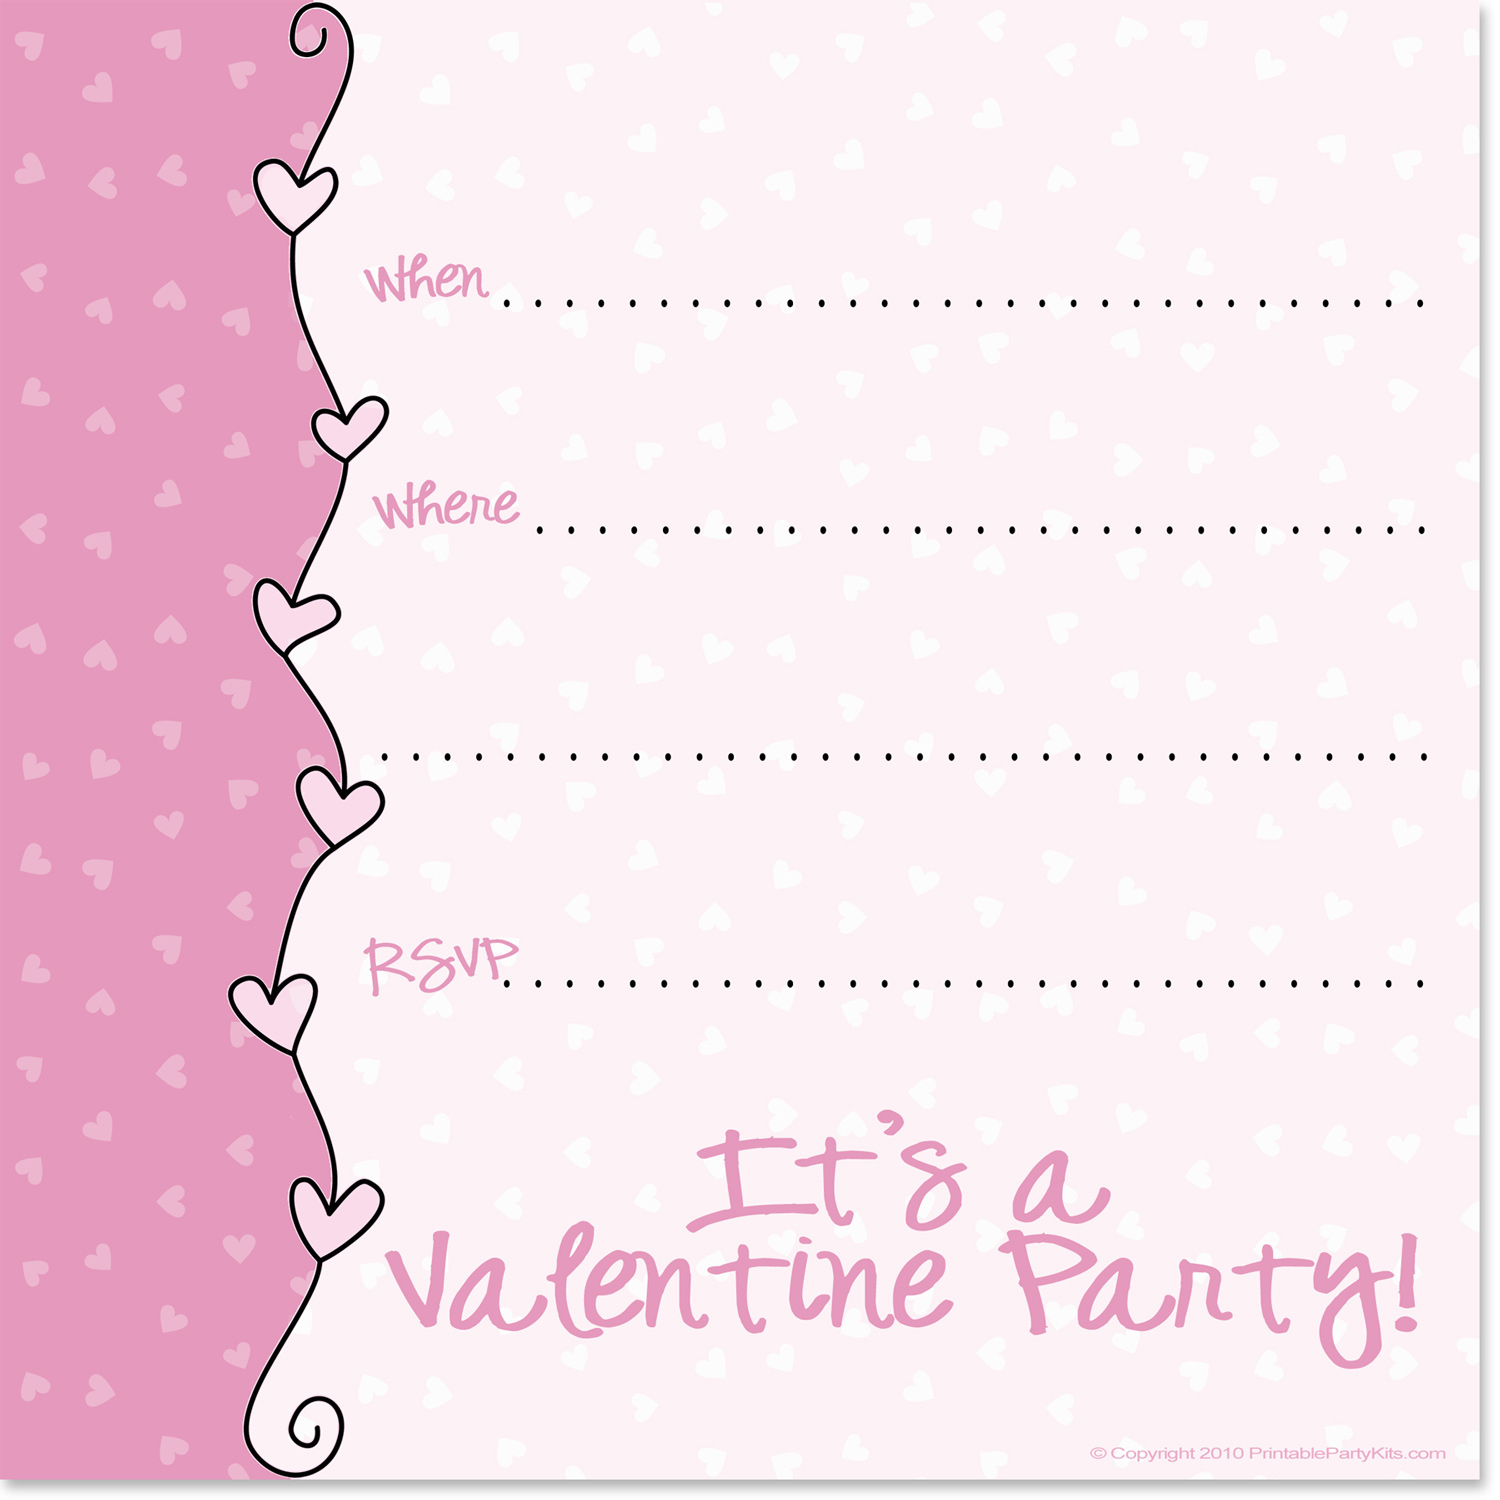 Free Printable Party Invitations Invitation Design For A Valentine S Day Party